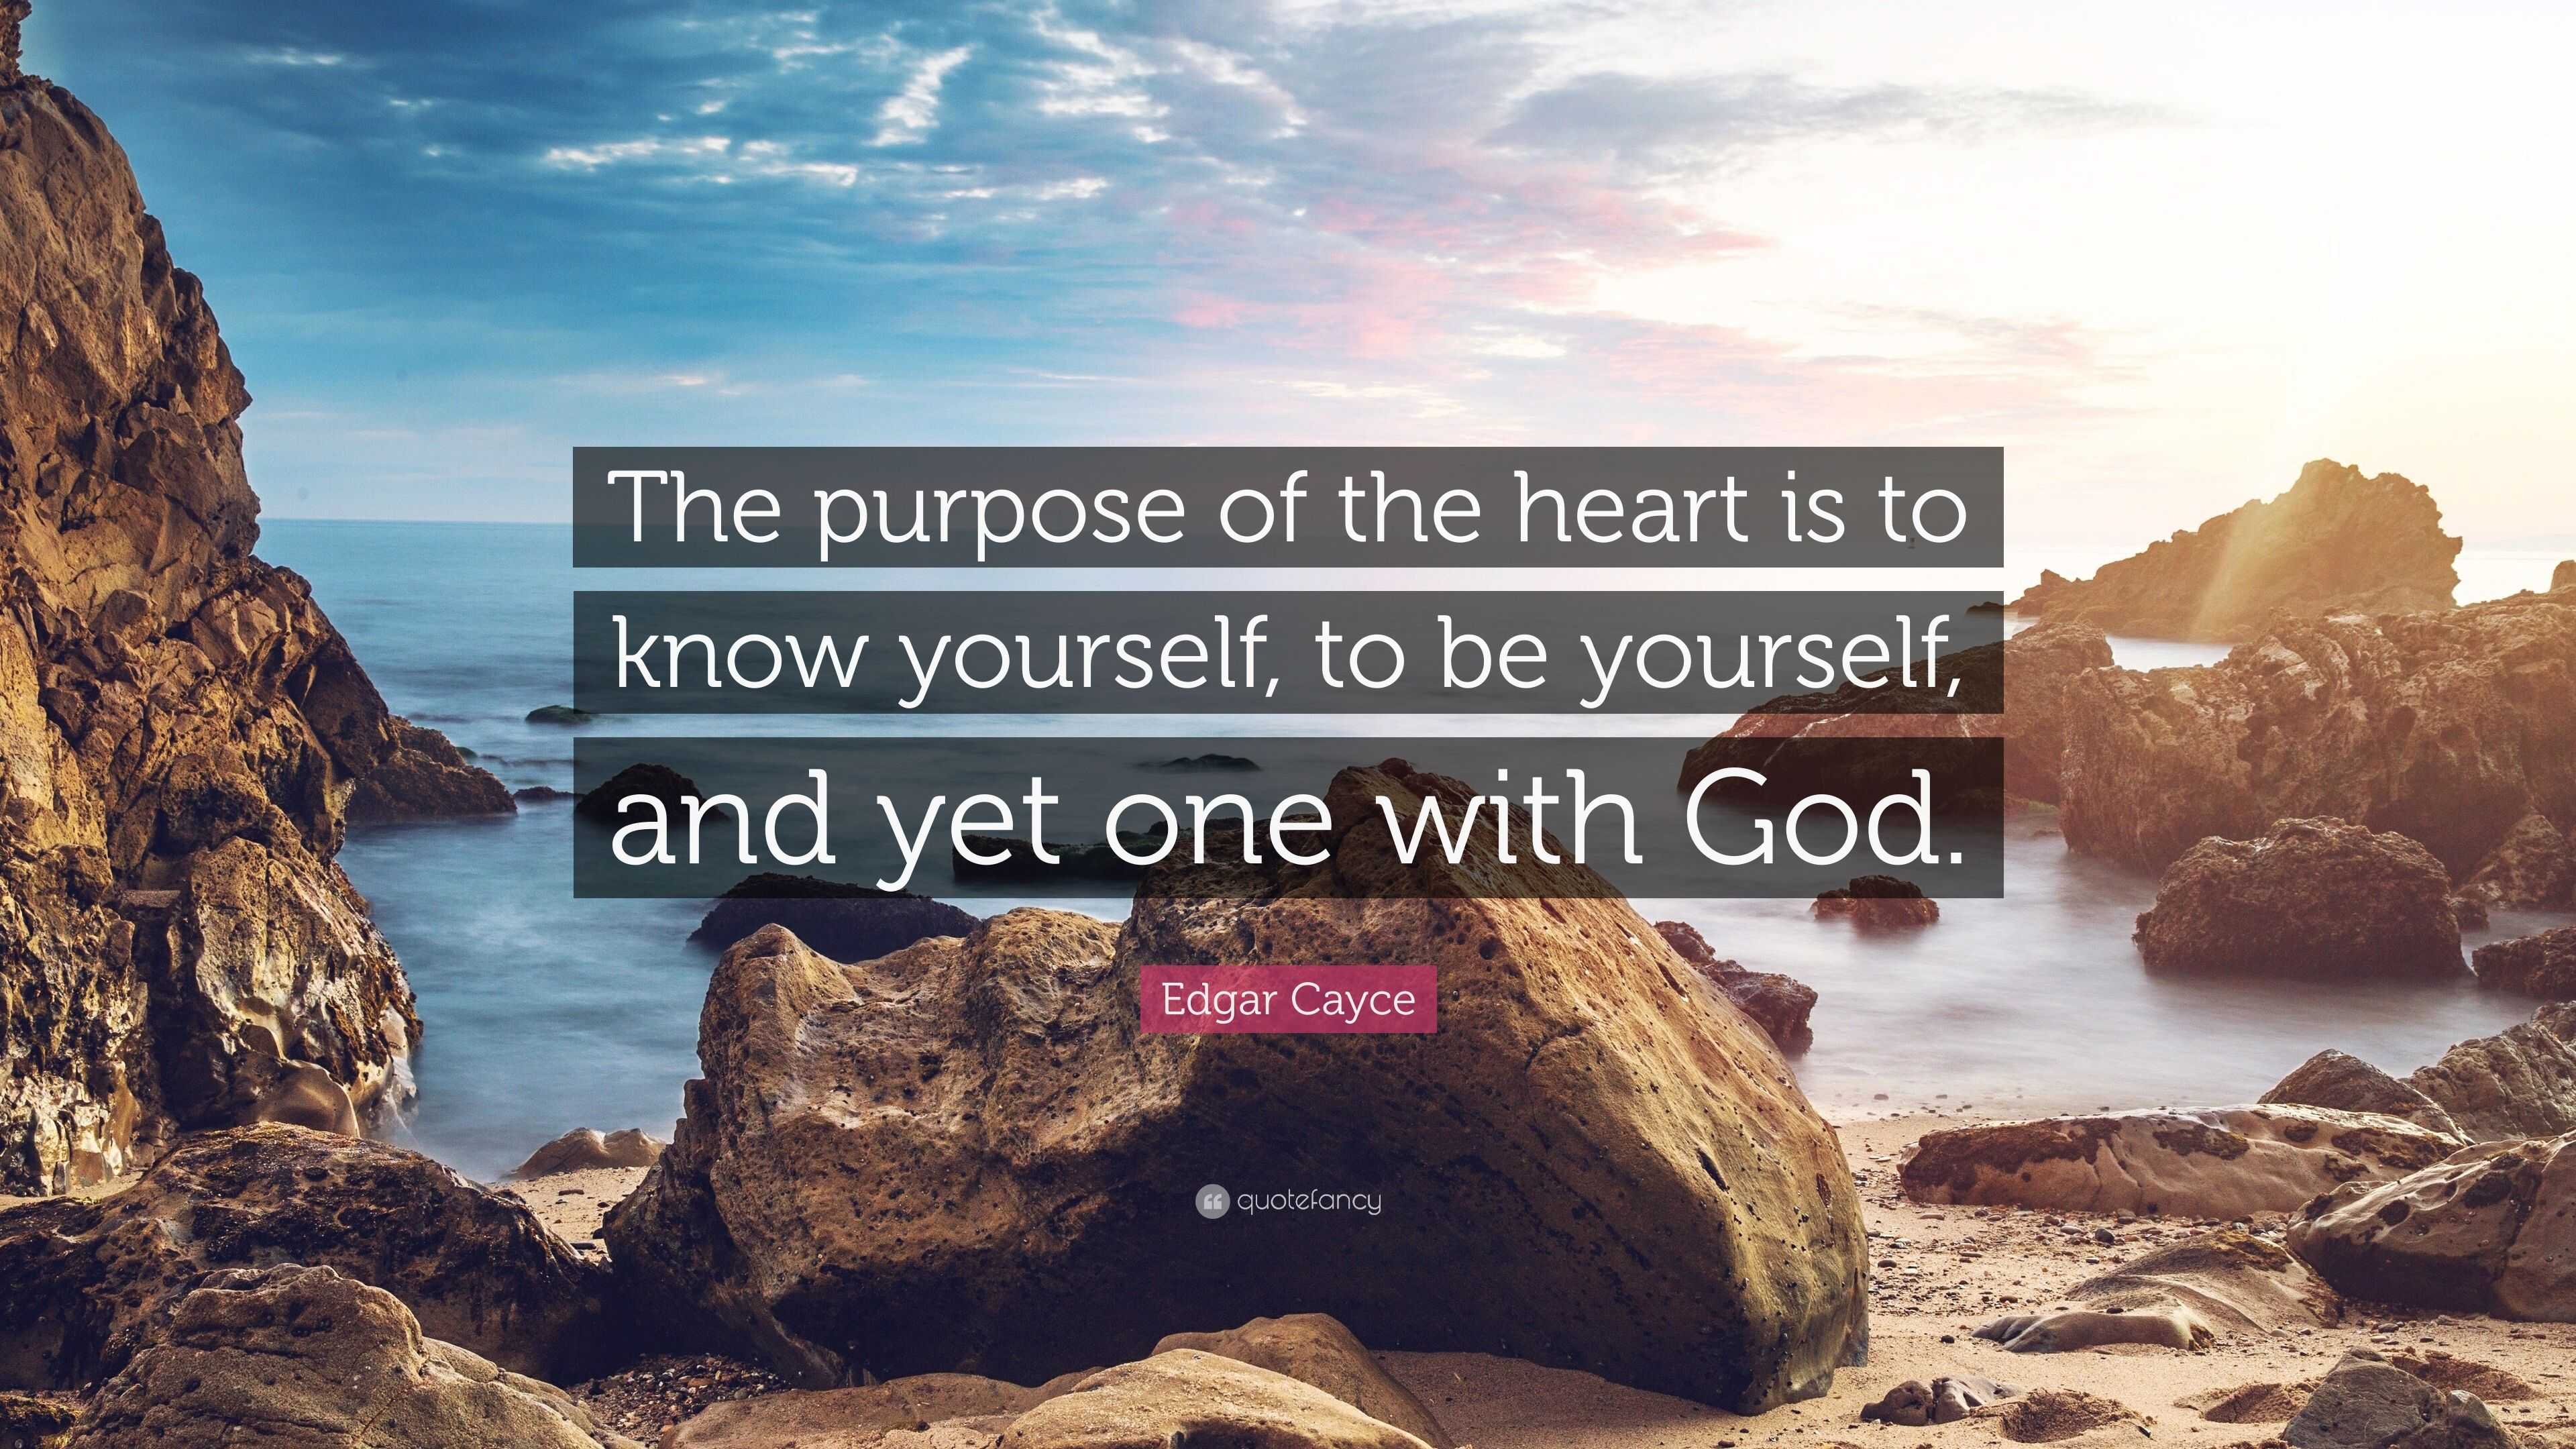 Edgar Cayce Quote: “The purpose of the heart is to know yourself, to be